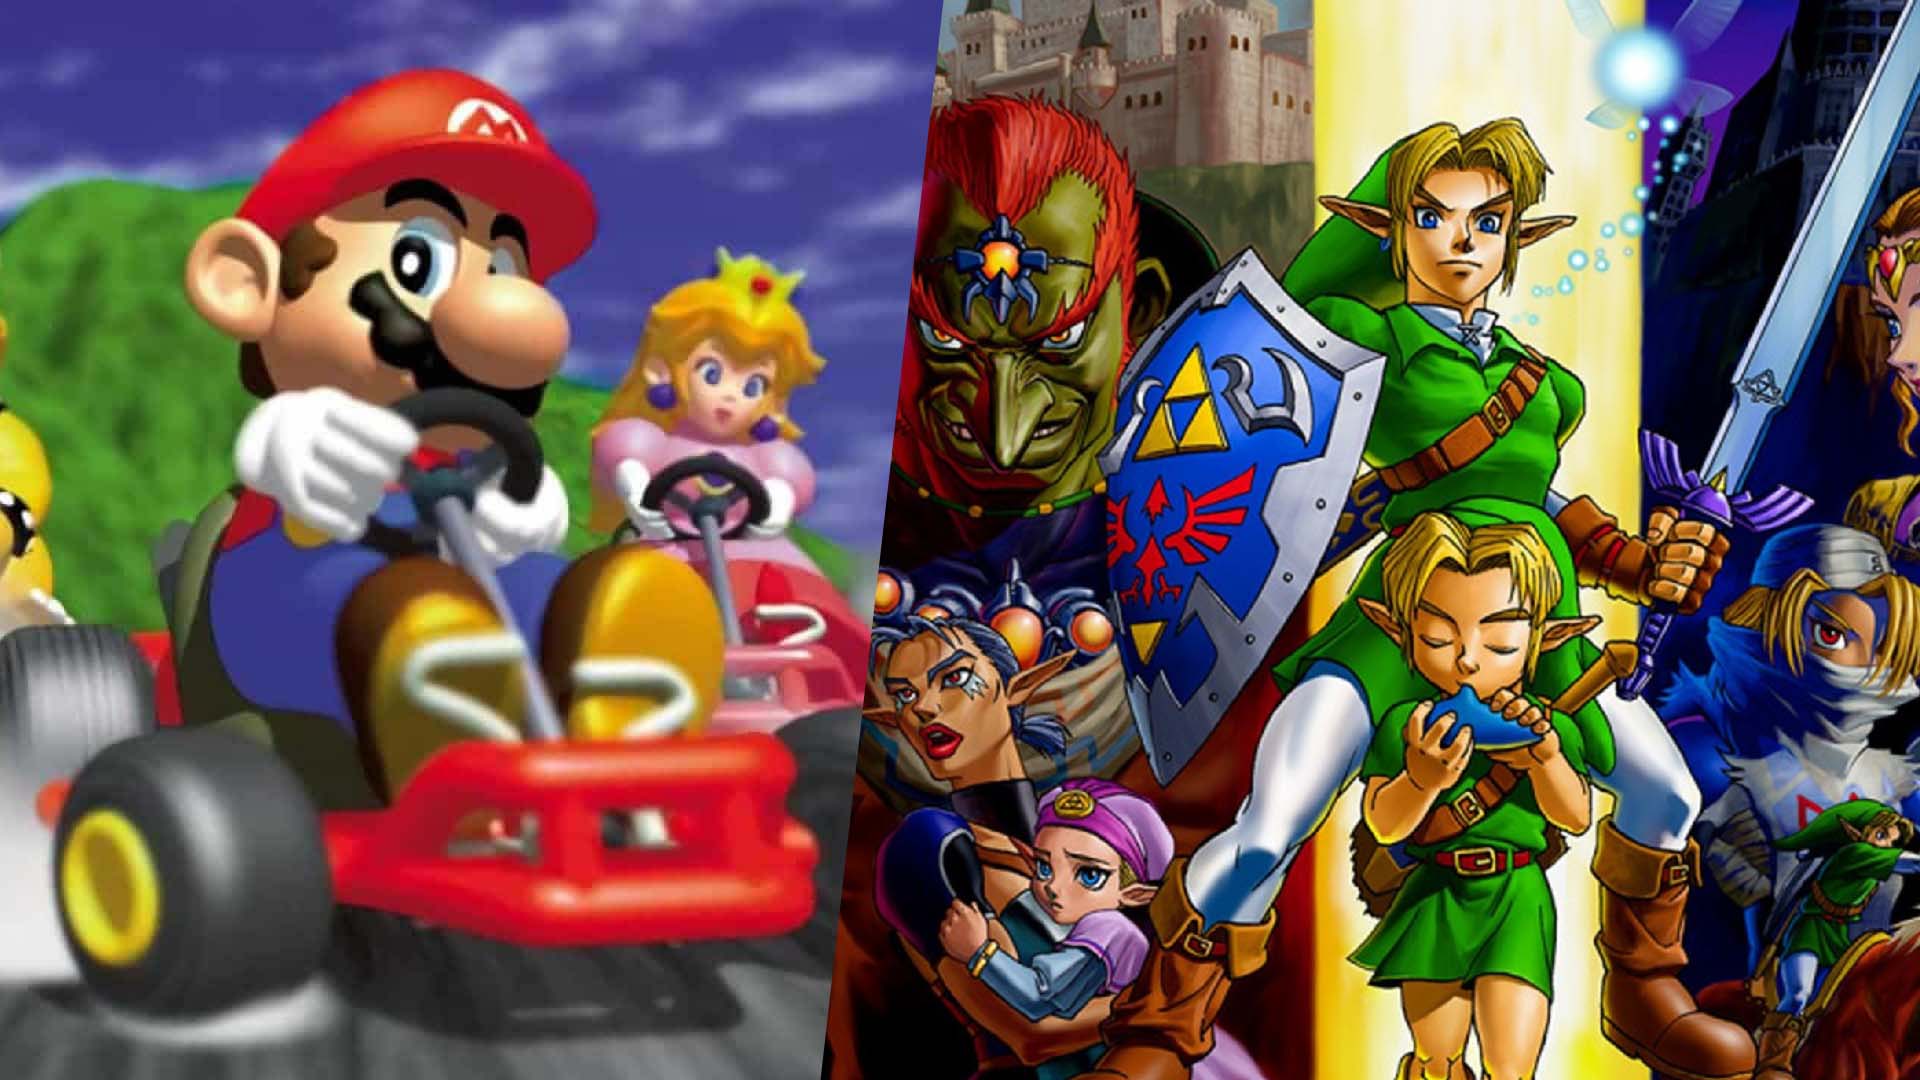 Nintendo Switch gets N64 games starting today – here's what to play ...